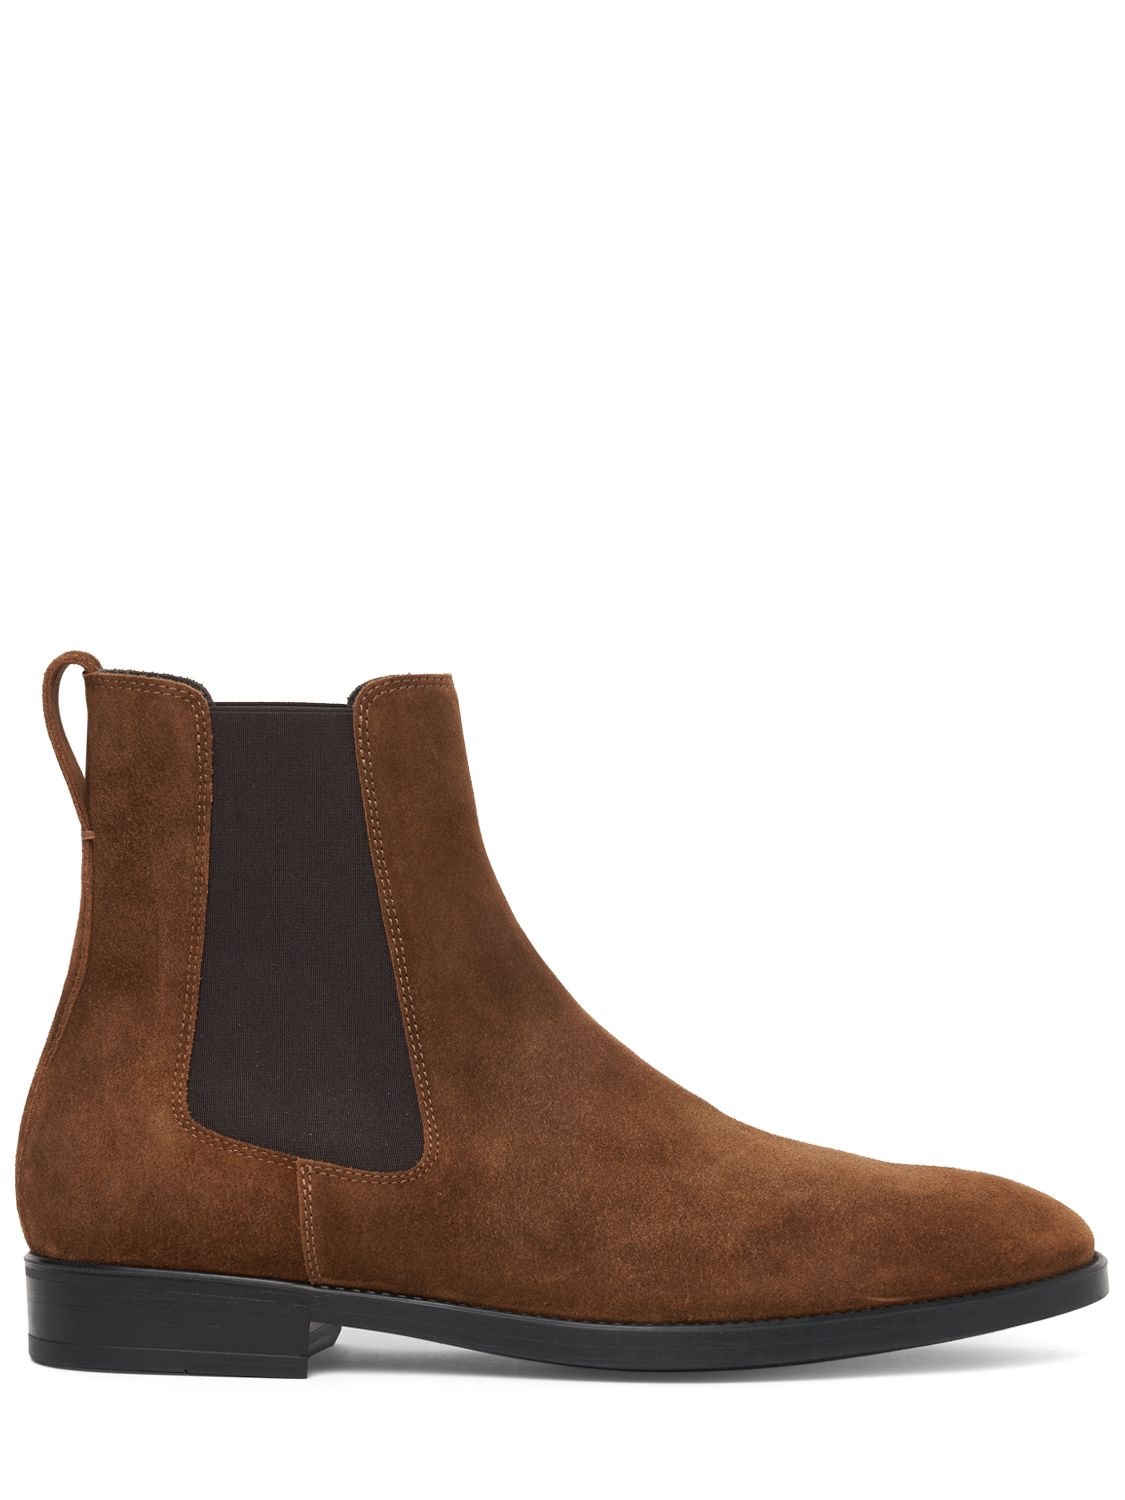 Tom Ford Robert Suede Ankle Boots In Tobacco